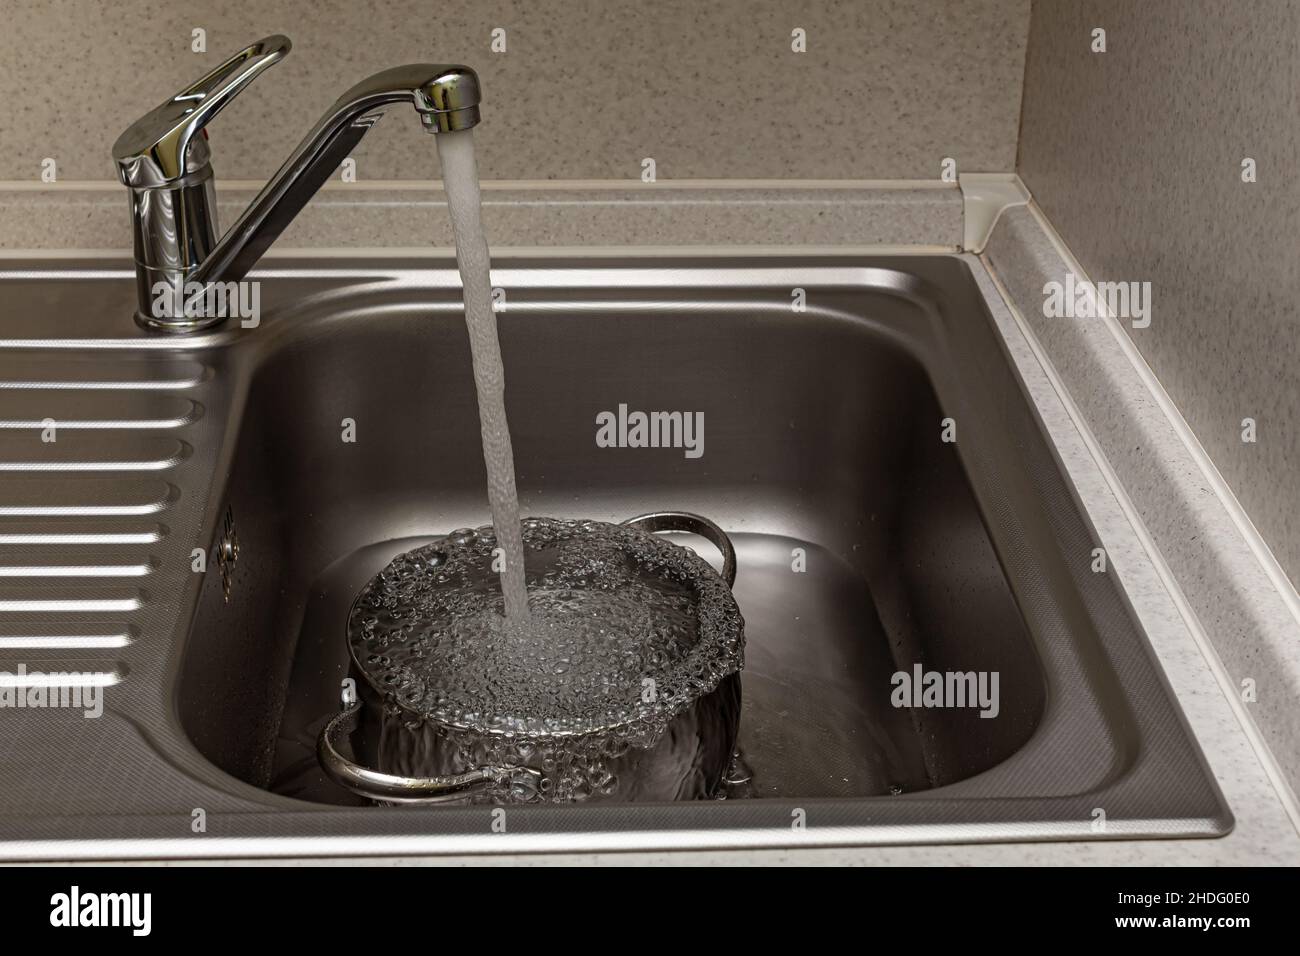 tap water is poured into the pan in the sink Stock Photo